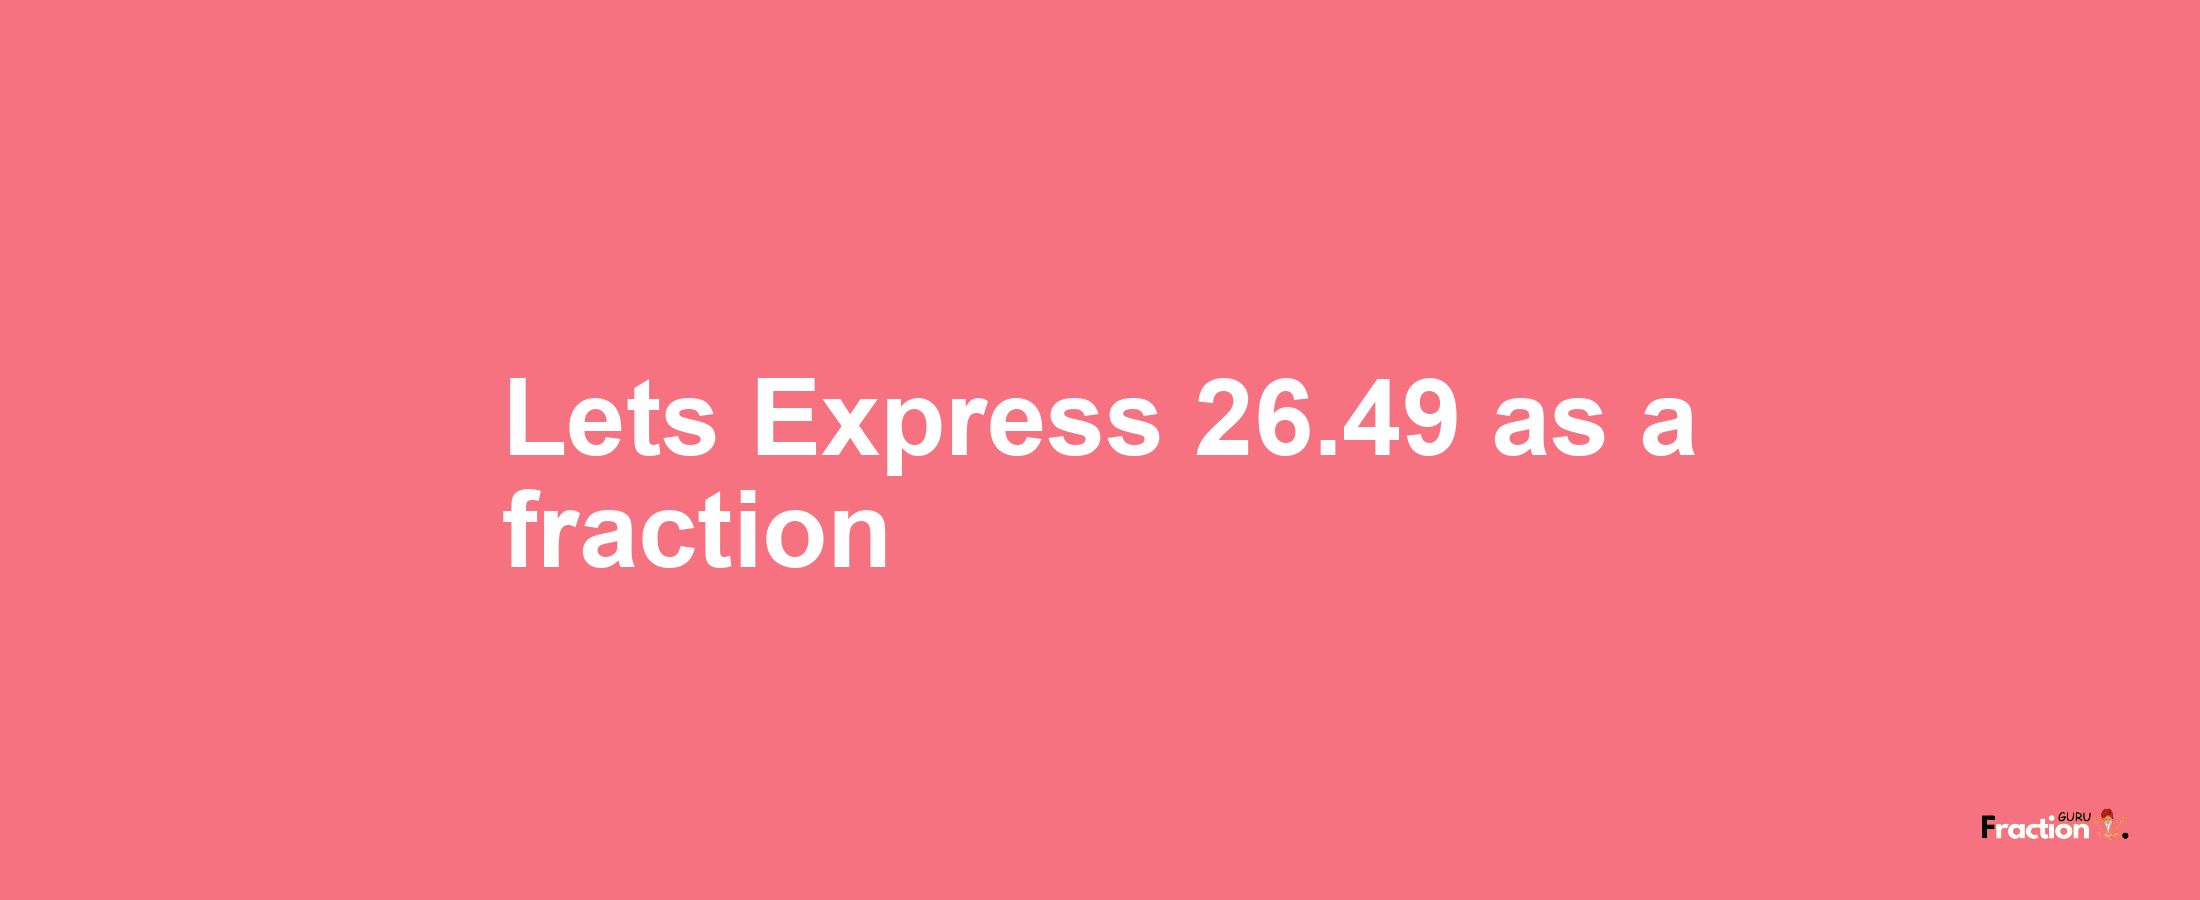 Lets Express 26.49 as afraction